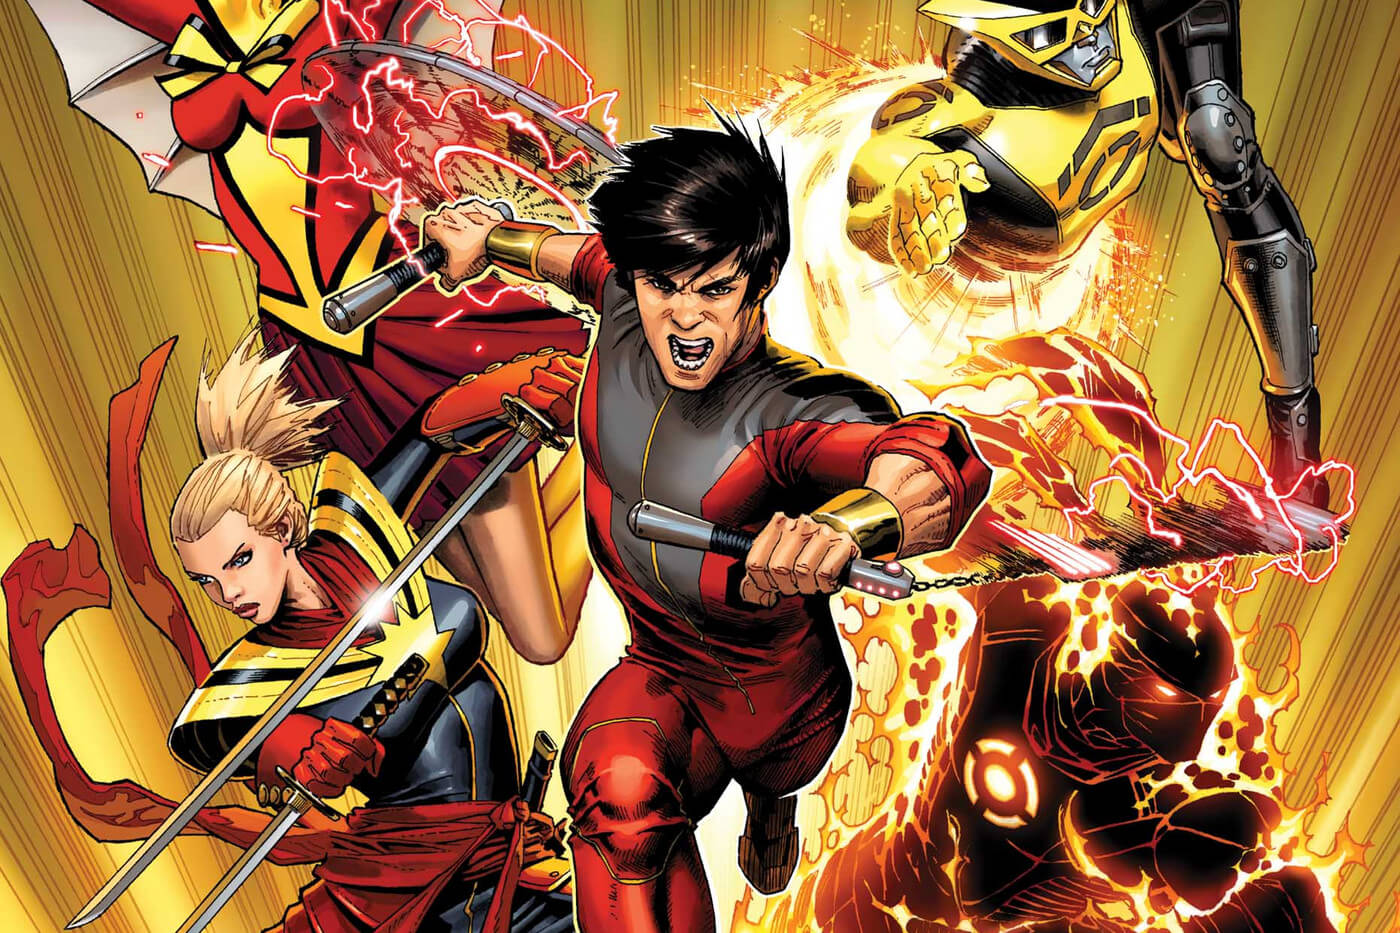 Leaked Action Figure Photos Offer A Better Look At Marvel’s ‘Shang-Chi’